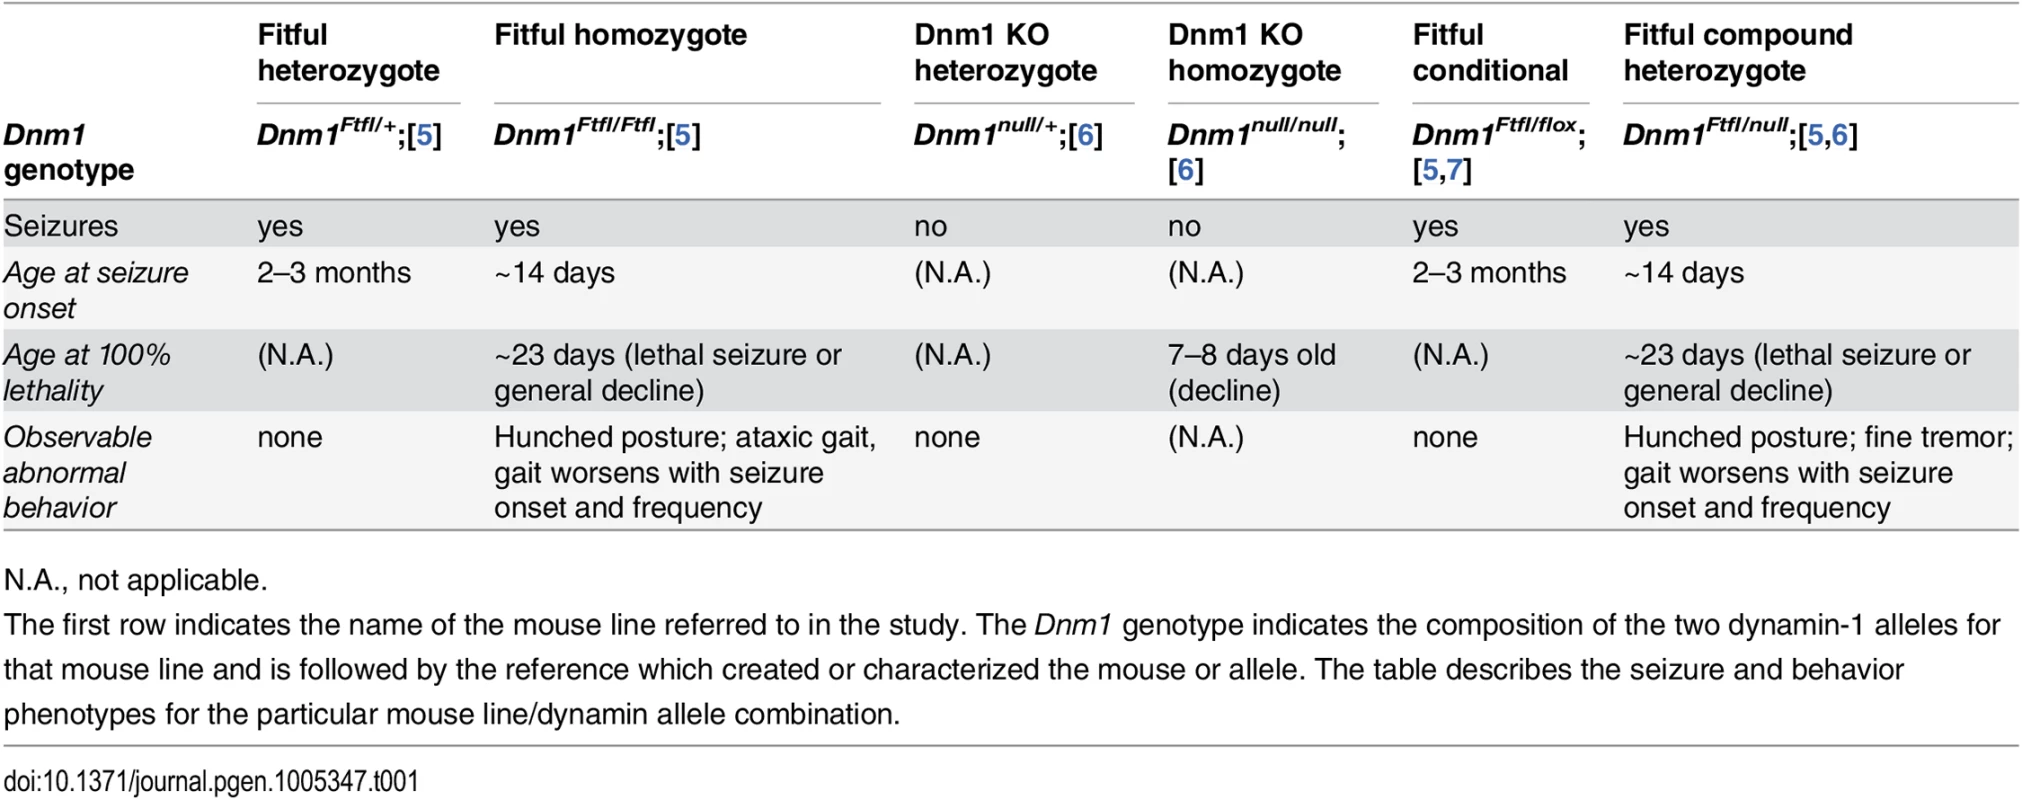 Dynamin 1 mutant genotypes referenced in this study.